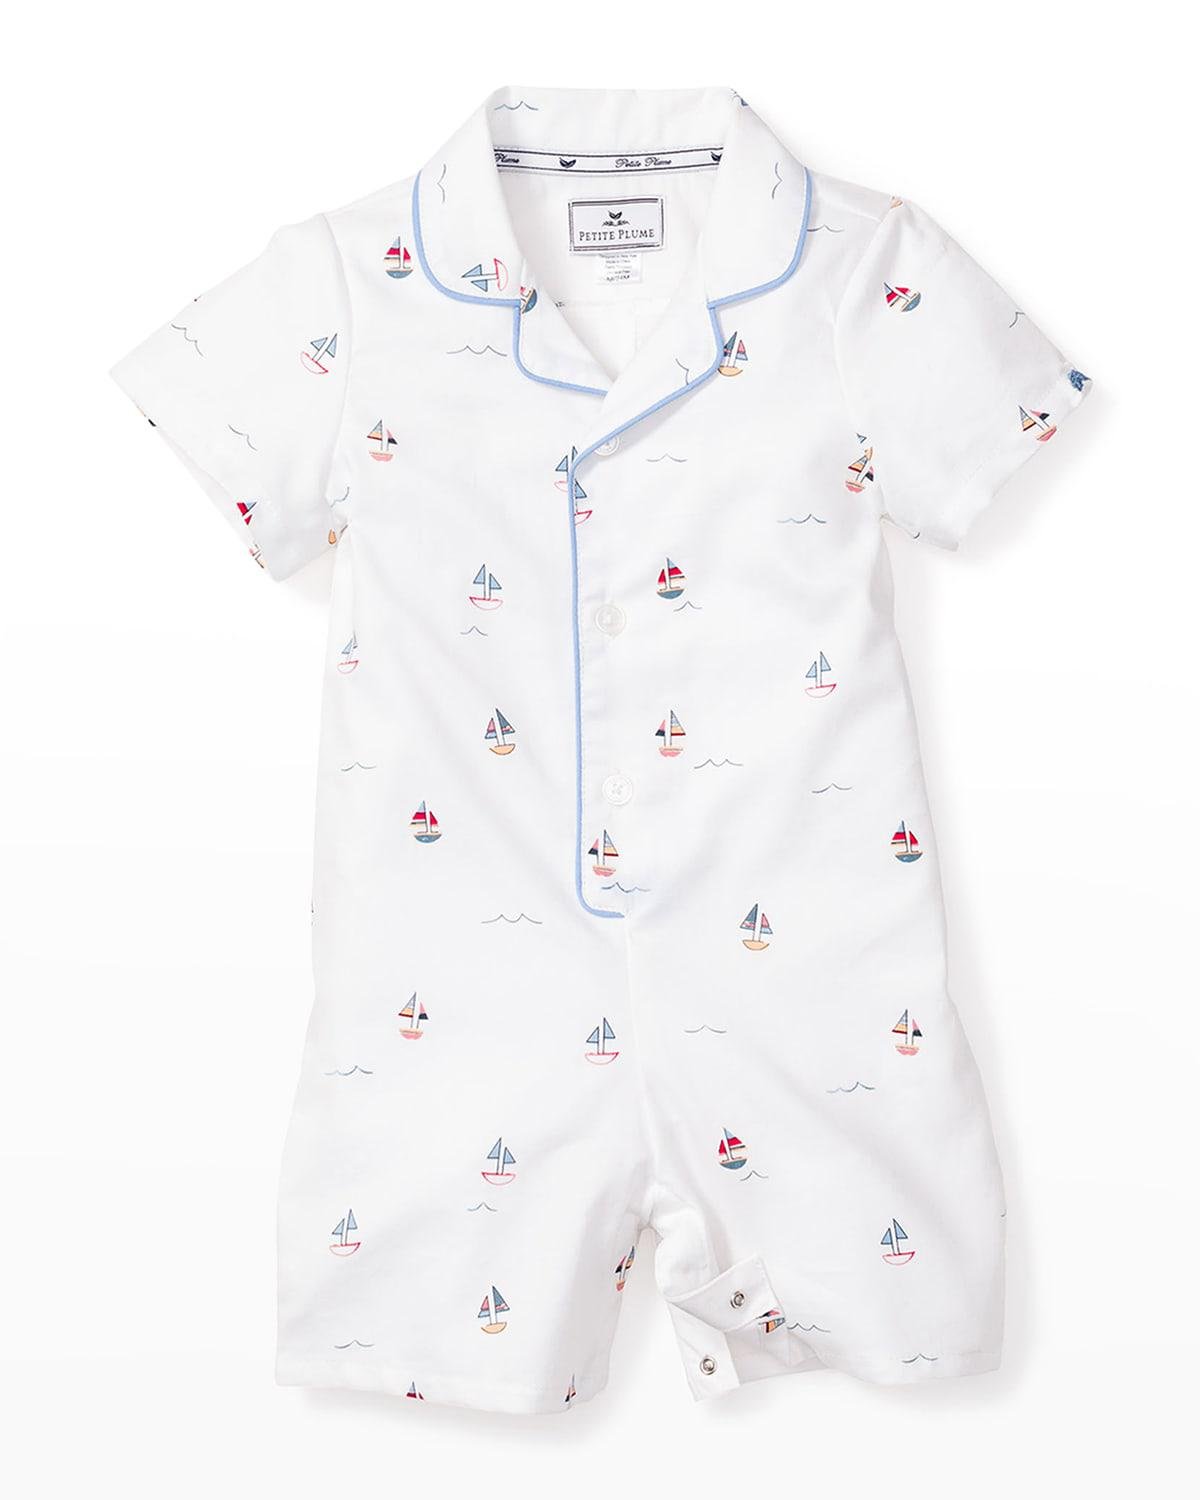 Kid's Sailboat-Print Summer Romper, Size 0-24 Months by PETITE PLUME